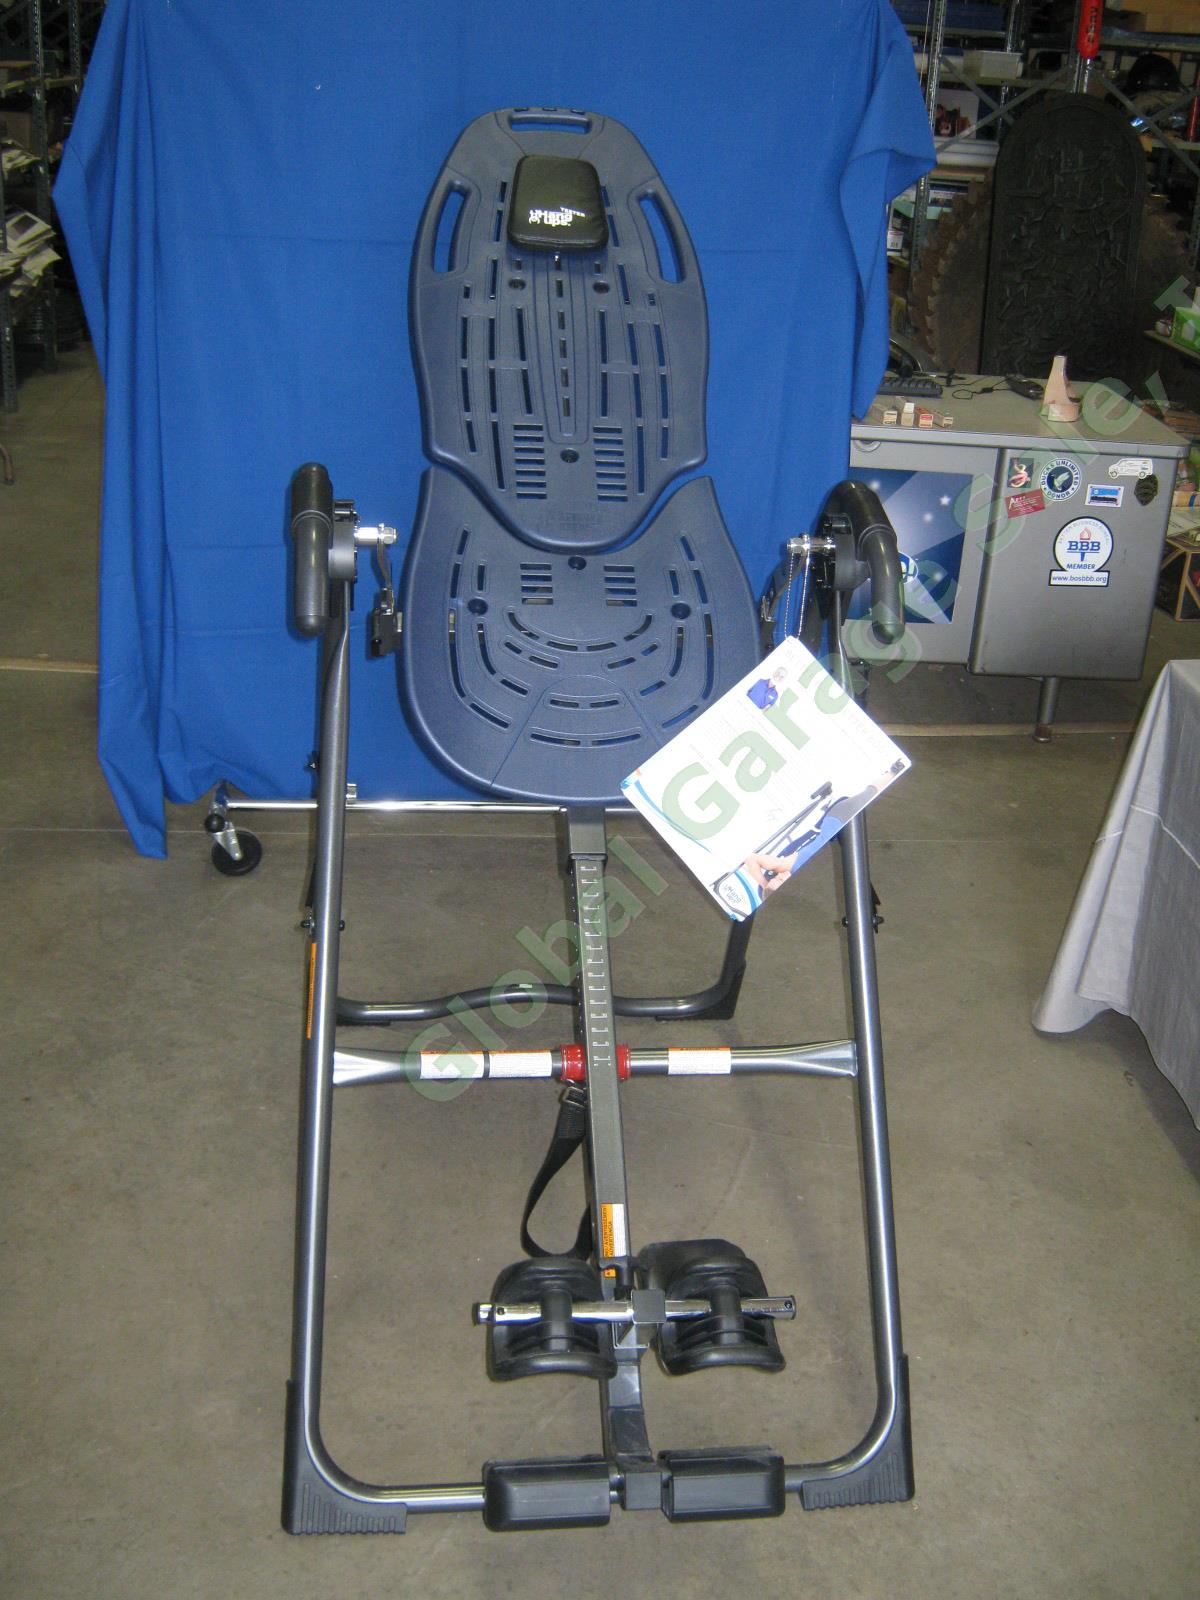 Teeter Hang Ups EP-560 Ltd Inversion Table w/ Manual DVD + Back Pain Relief Kit